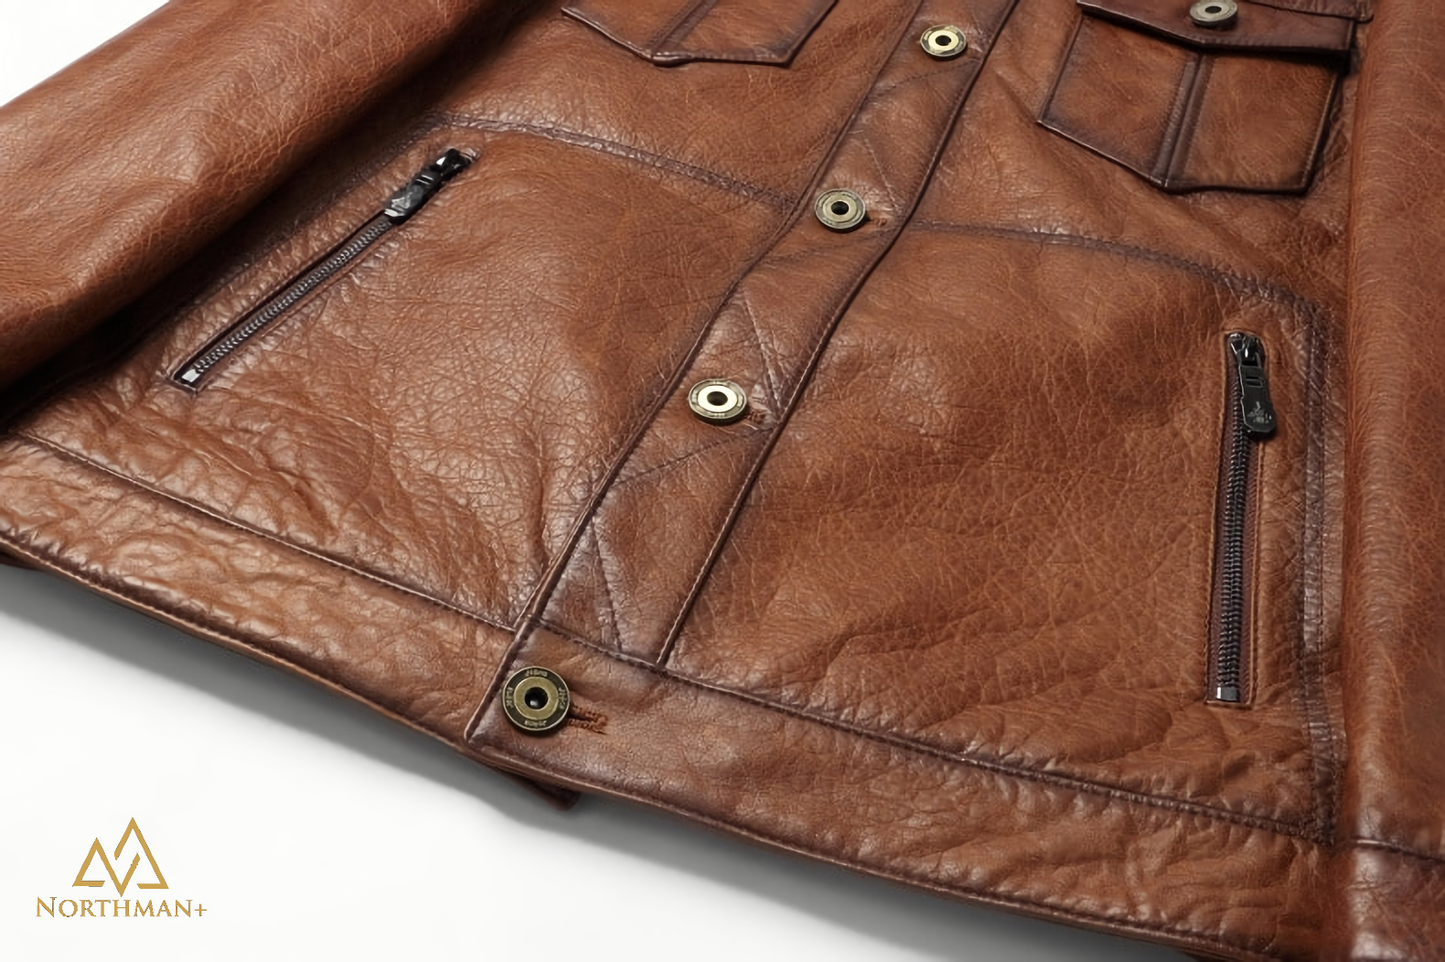 Seargent Field Leather Jacket in Brown